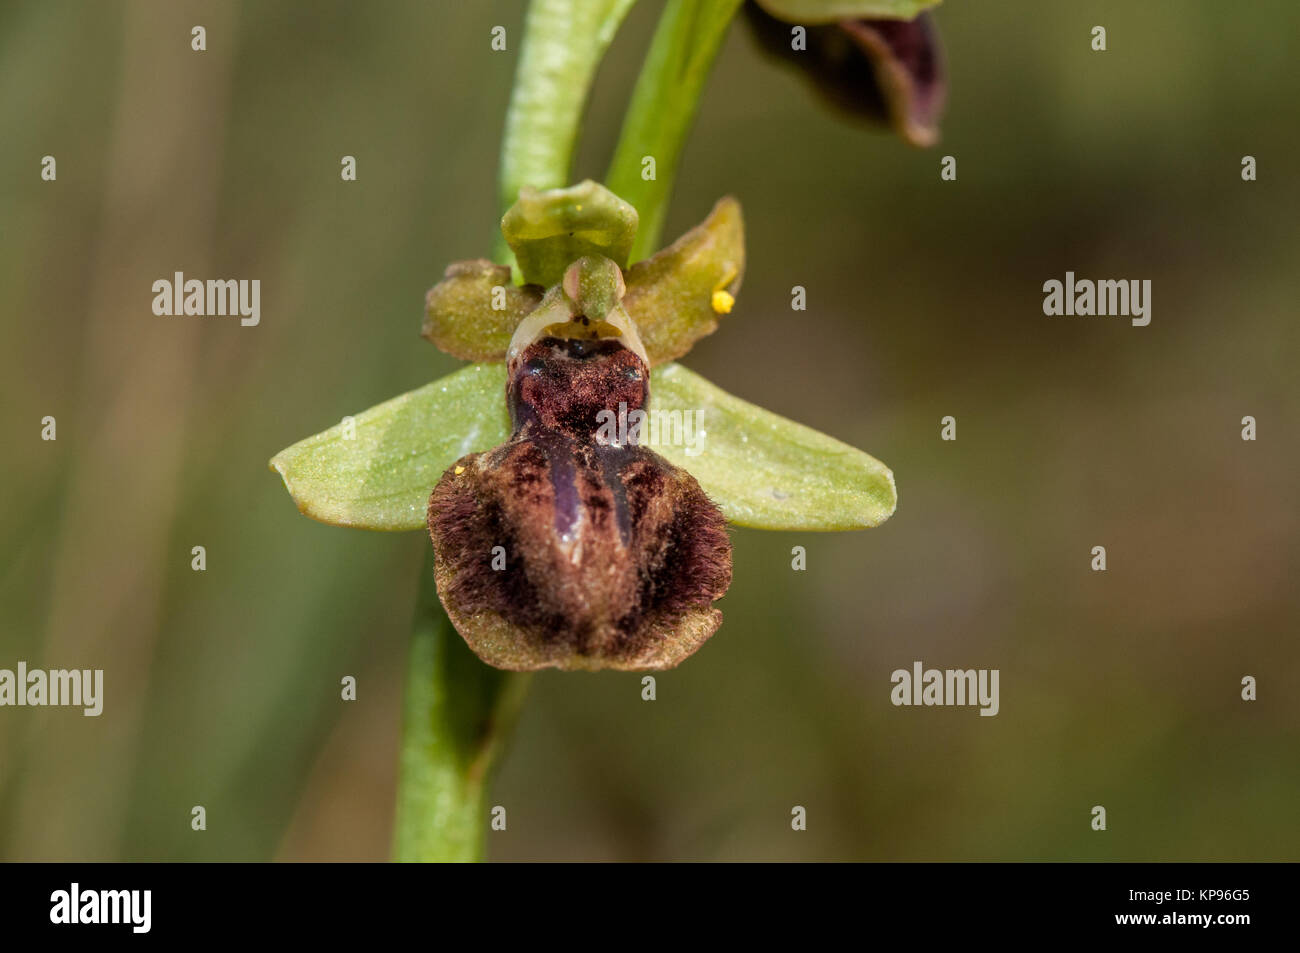 close-up view of Early Spider-orchid, Ophrys sphegodes, Santpedor, Catalonia, Spain Stock Photo